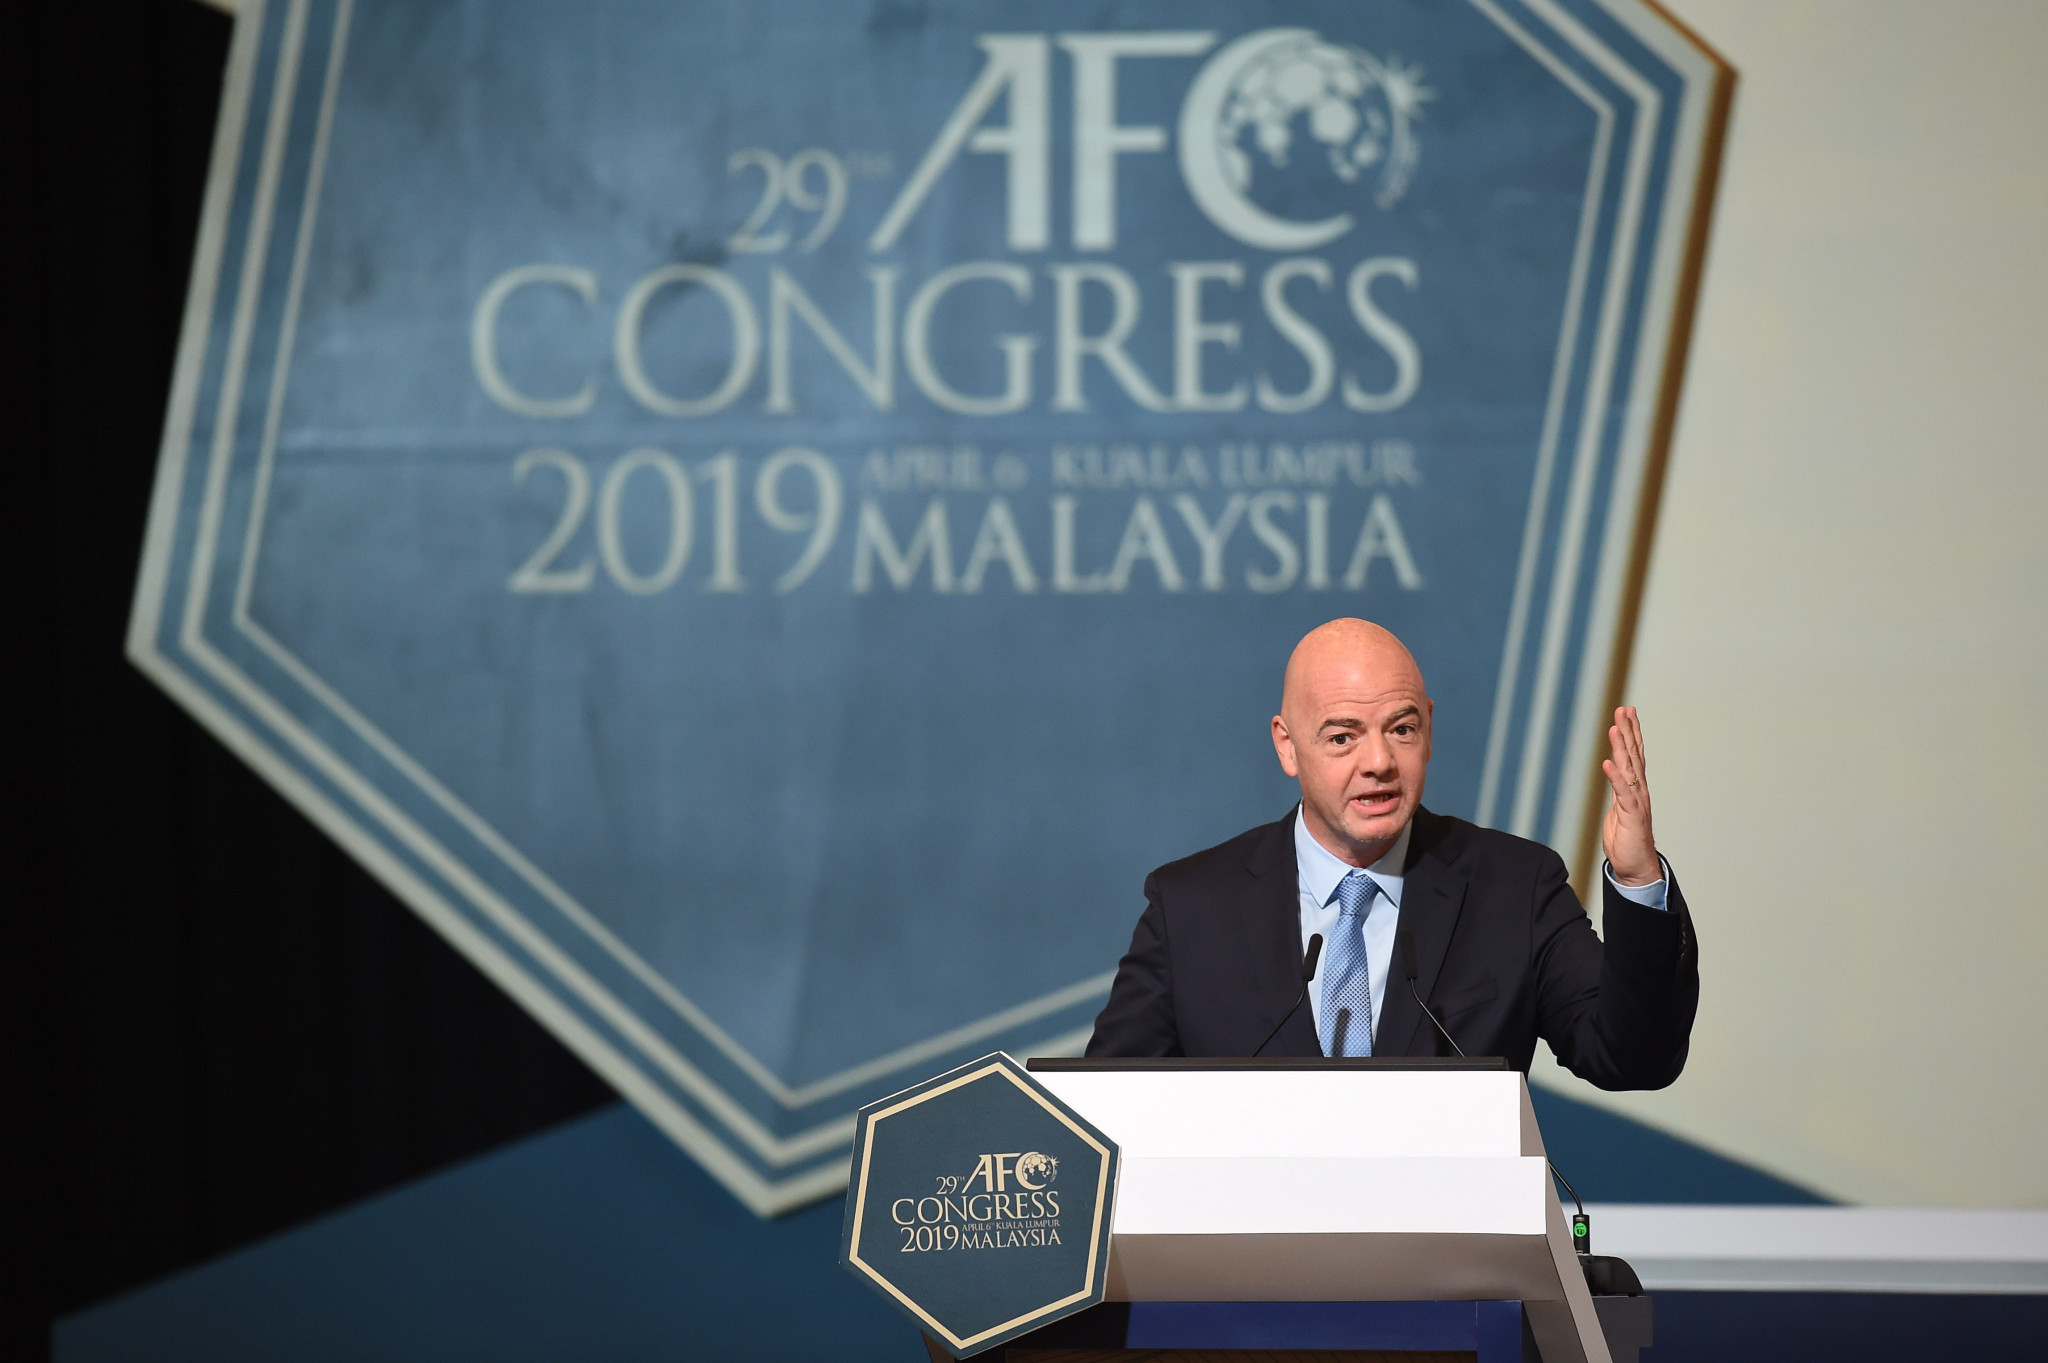 FIFA President Gianni Infantino hailed the re-election of Shaikh Salman as AFC President ©Getty Images